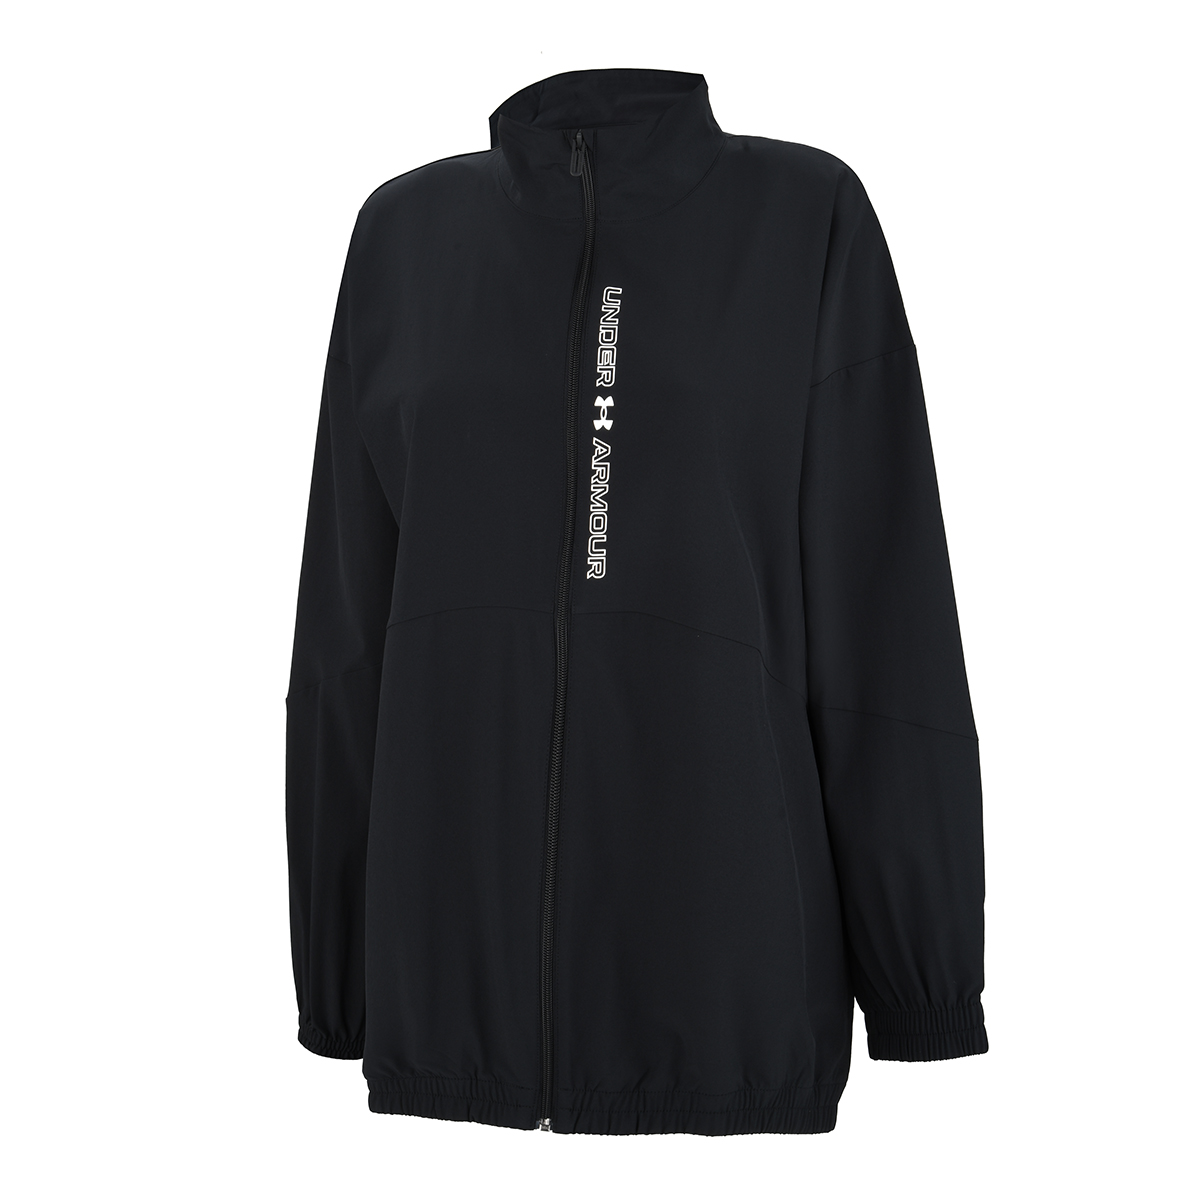 Campera Entrenamiento Under Armour Fz Mujer,  image number null